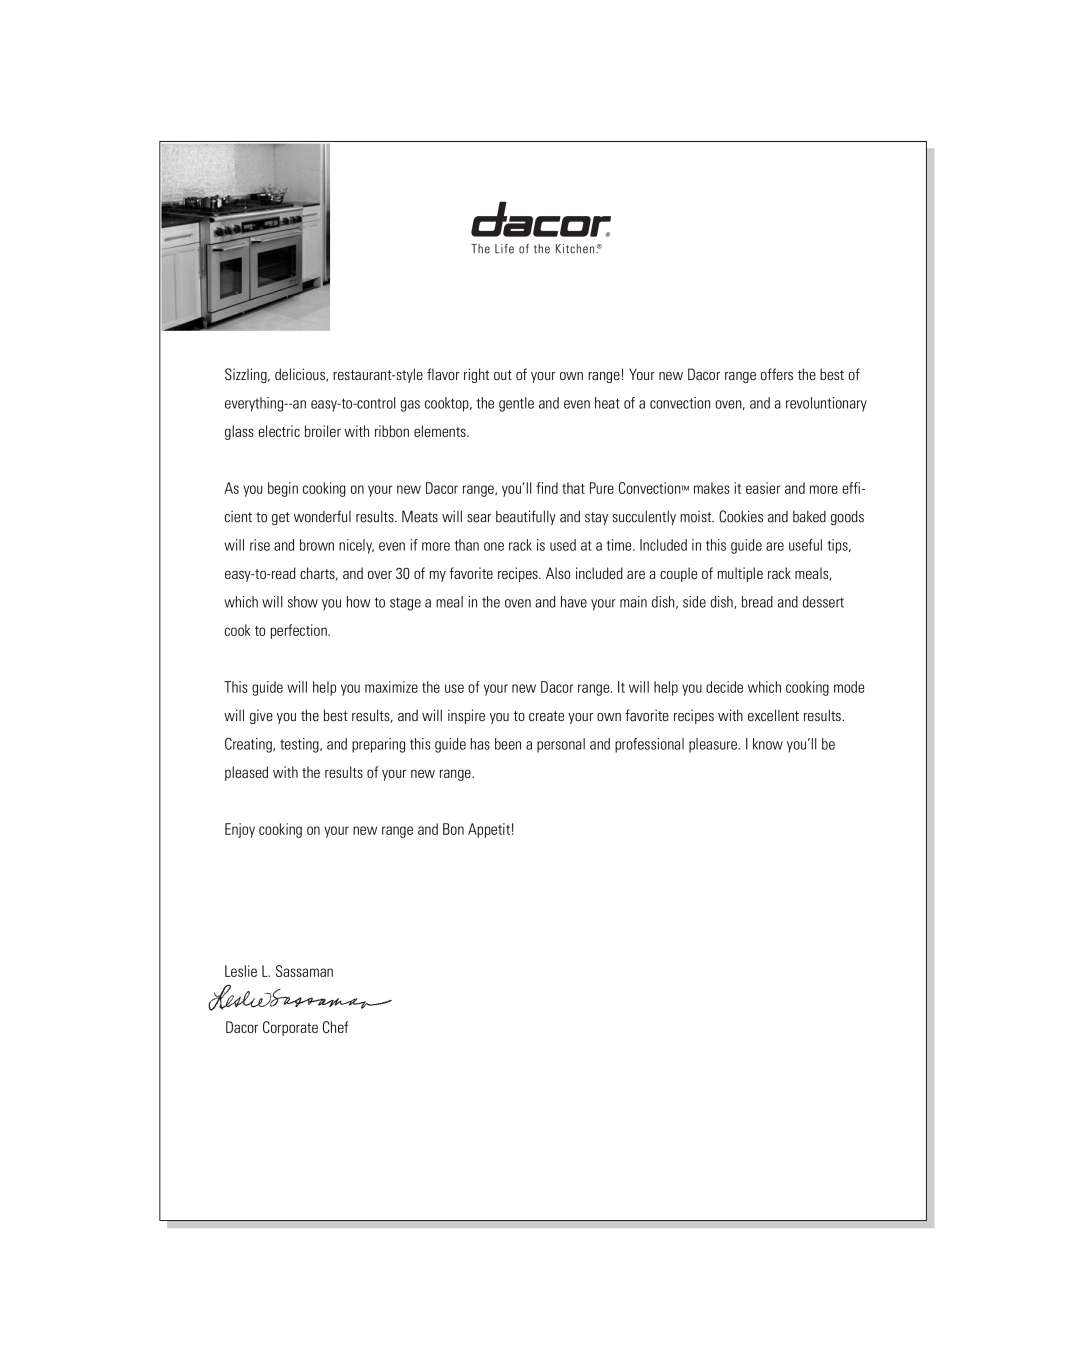 Dacor Range Cooking manual Enjoy cooking on your new range and Bon Appetit, Leslie L. Sassaman Dacor Corporate Chef 